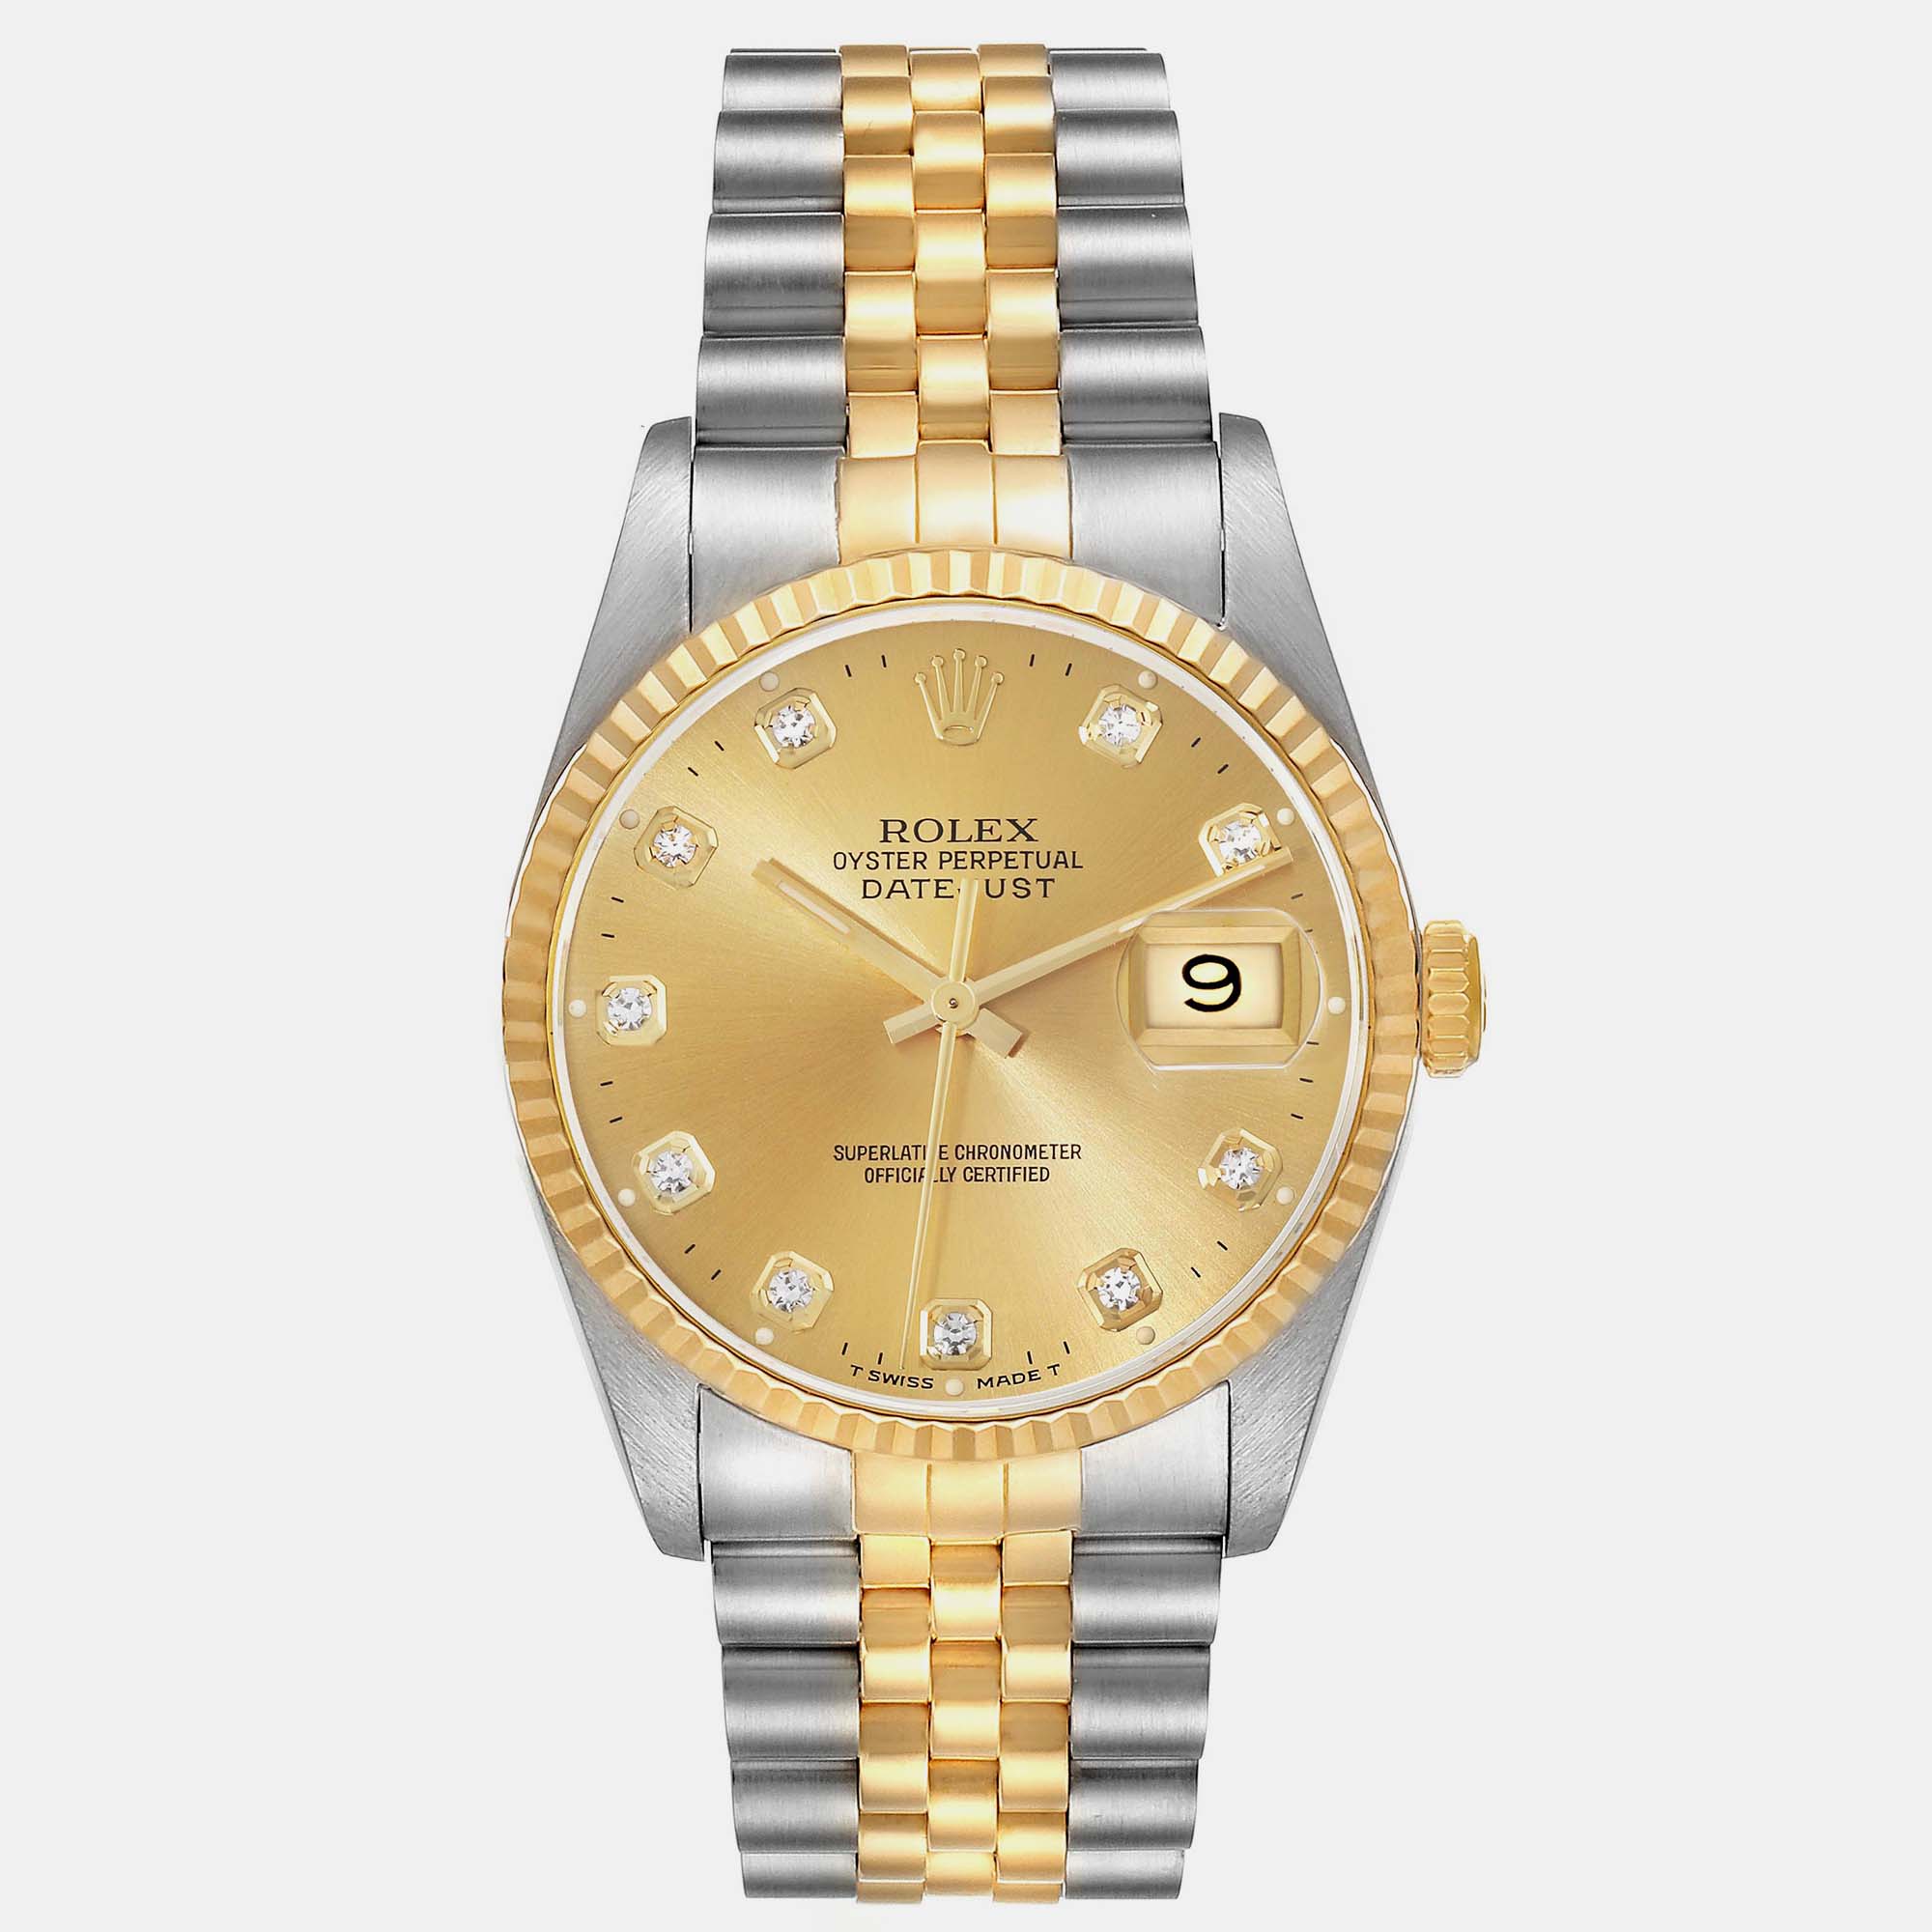 Rolex Datejust Champagne Diamond Dial Steel Yellow Gold Mens Watch 16233